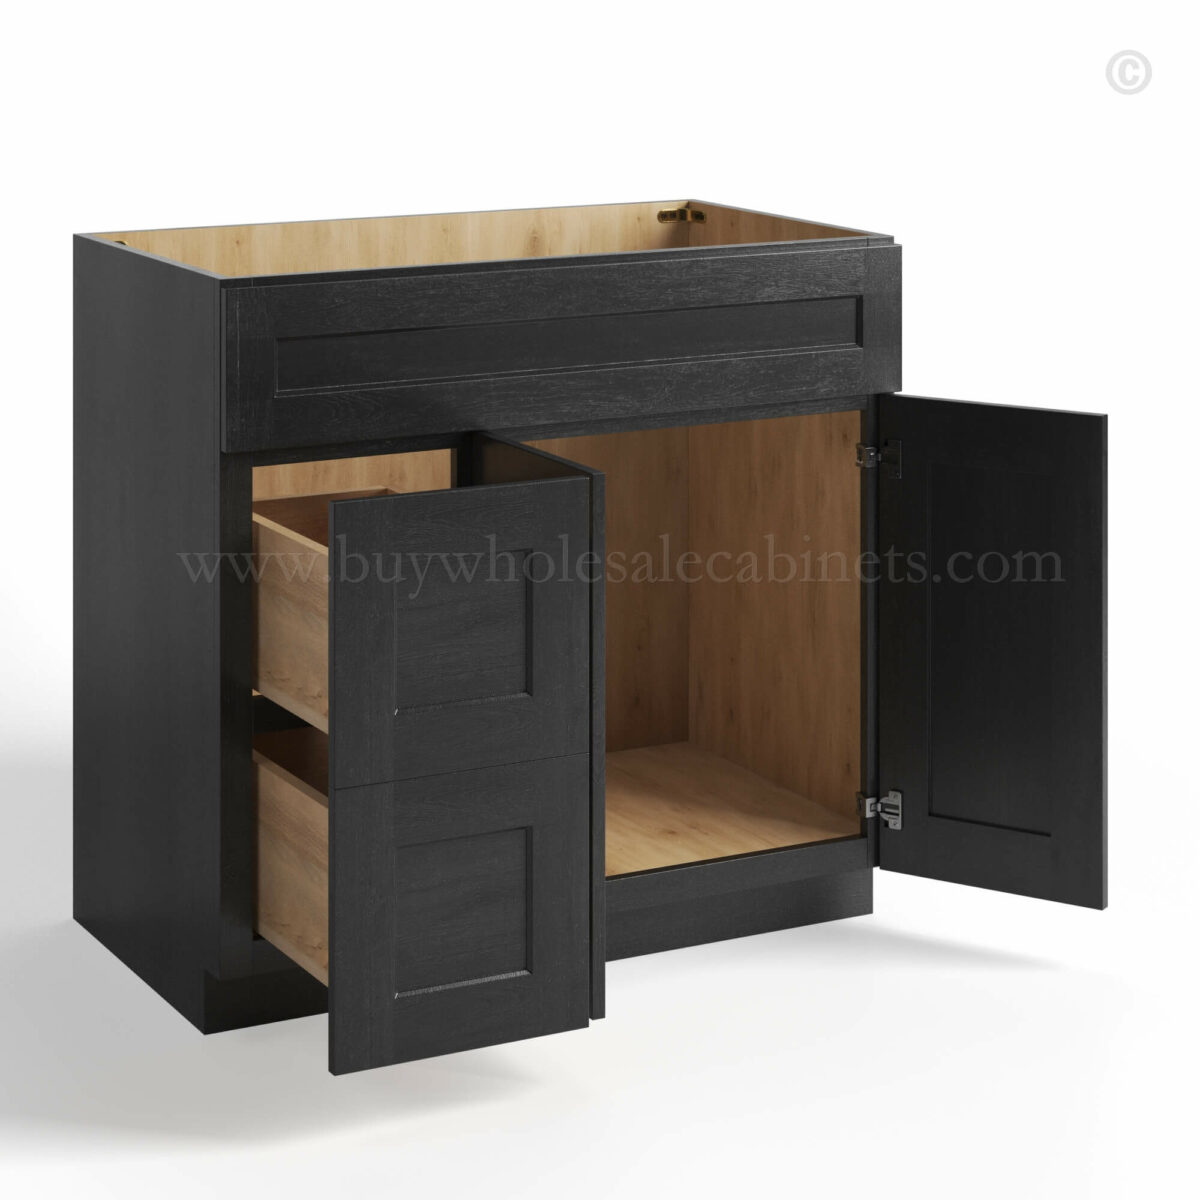 charcoal black shaker vanity sink base combo with two drawer right and two doors, rta cabinets, wholesale cabinets